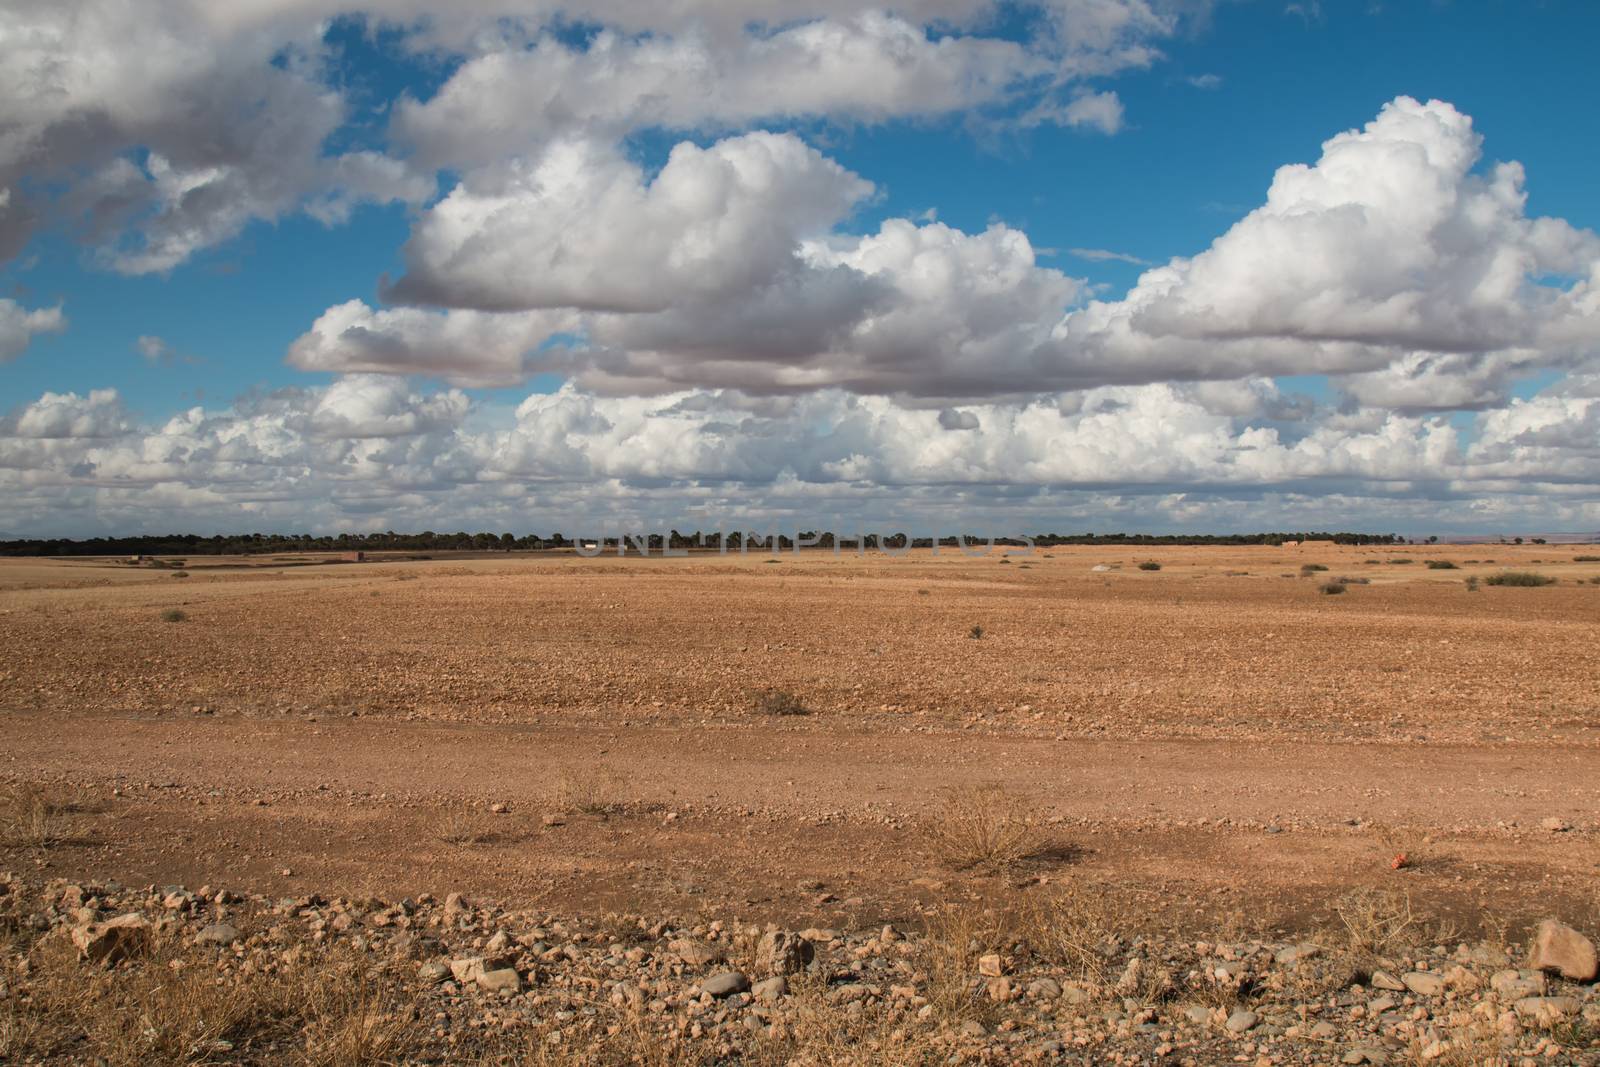 Moroccan nature in the autumn. Empty field ready for the new season. Intense cloudy sky.